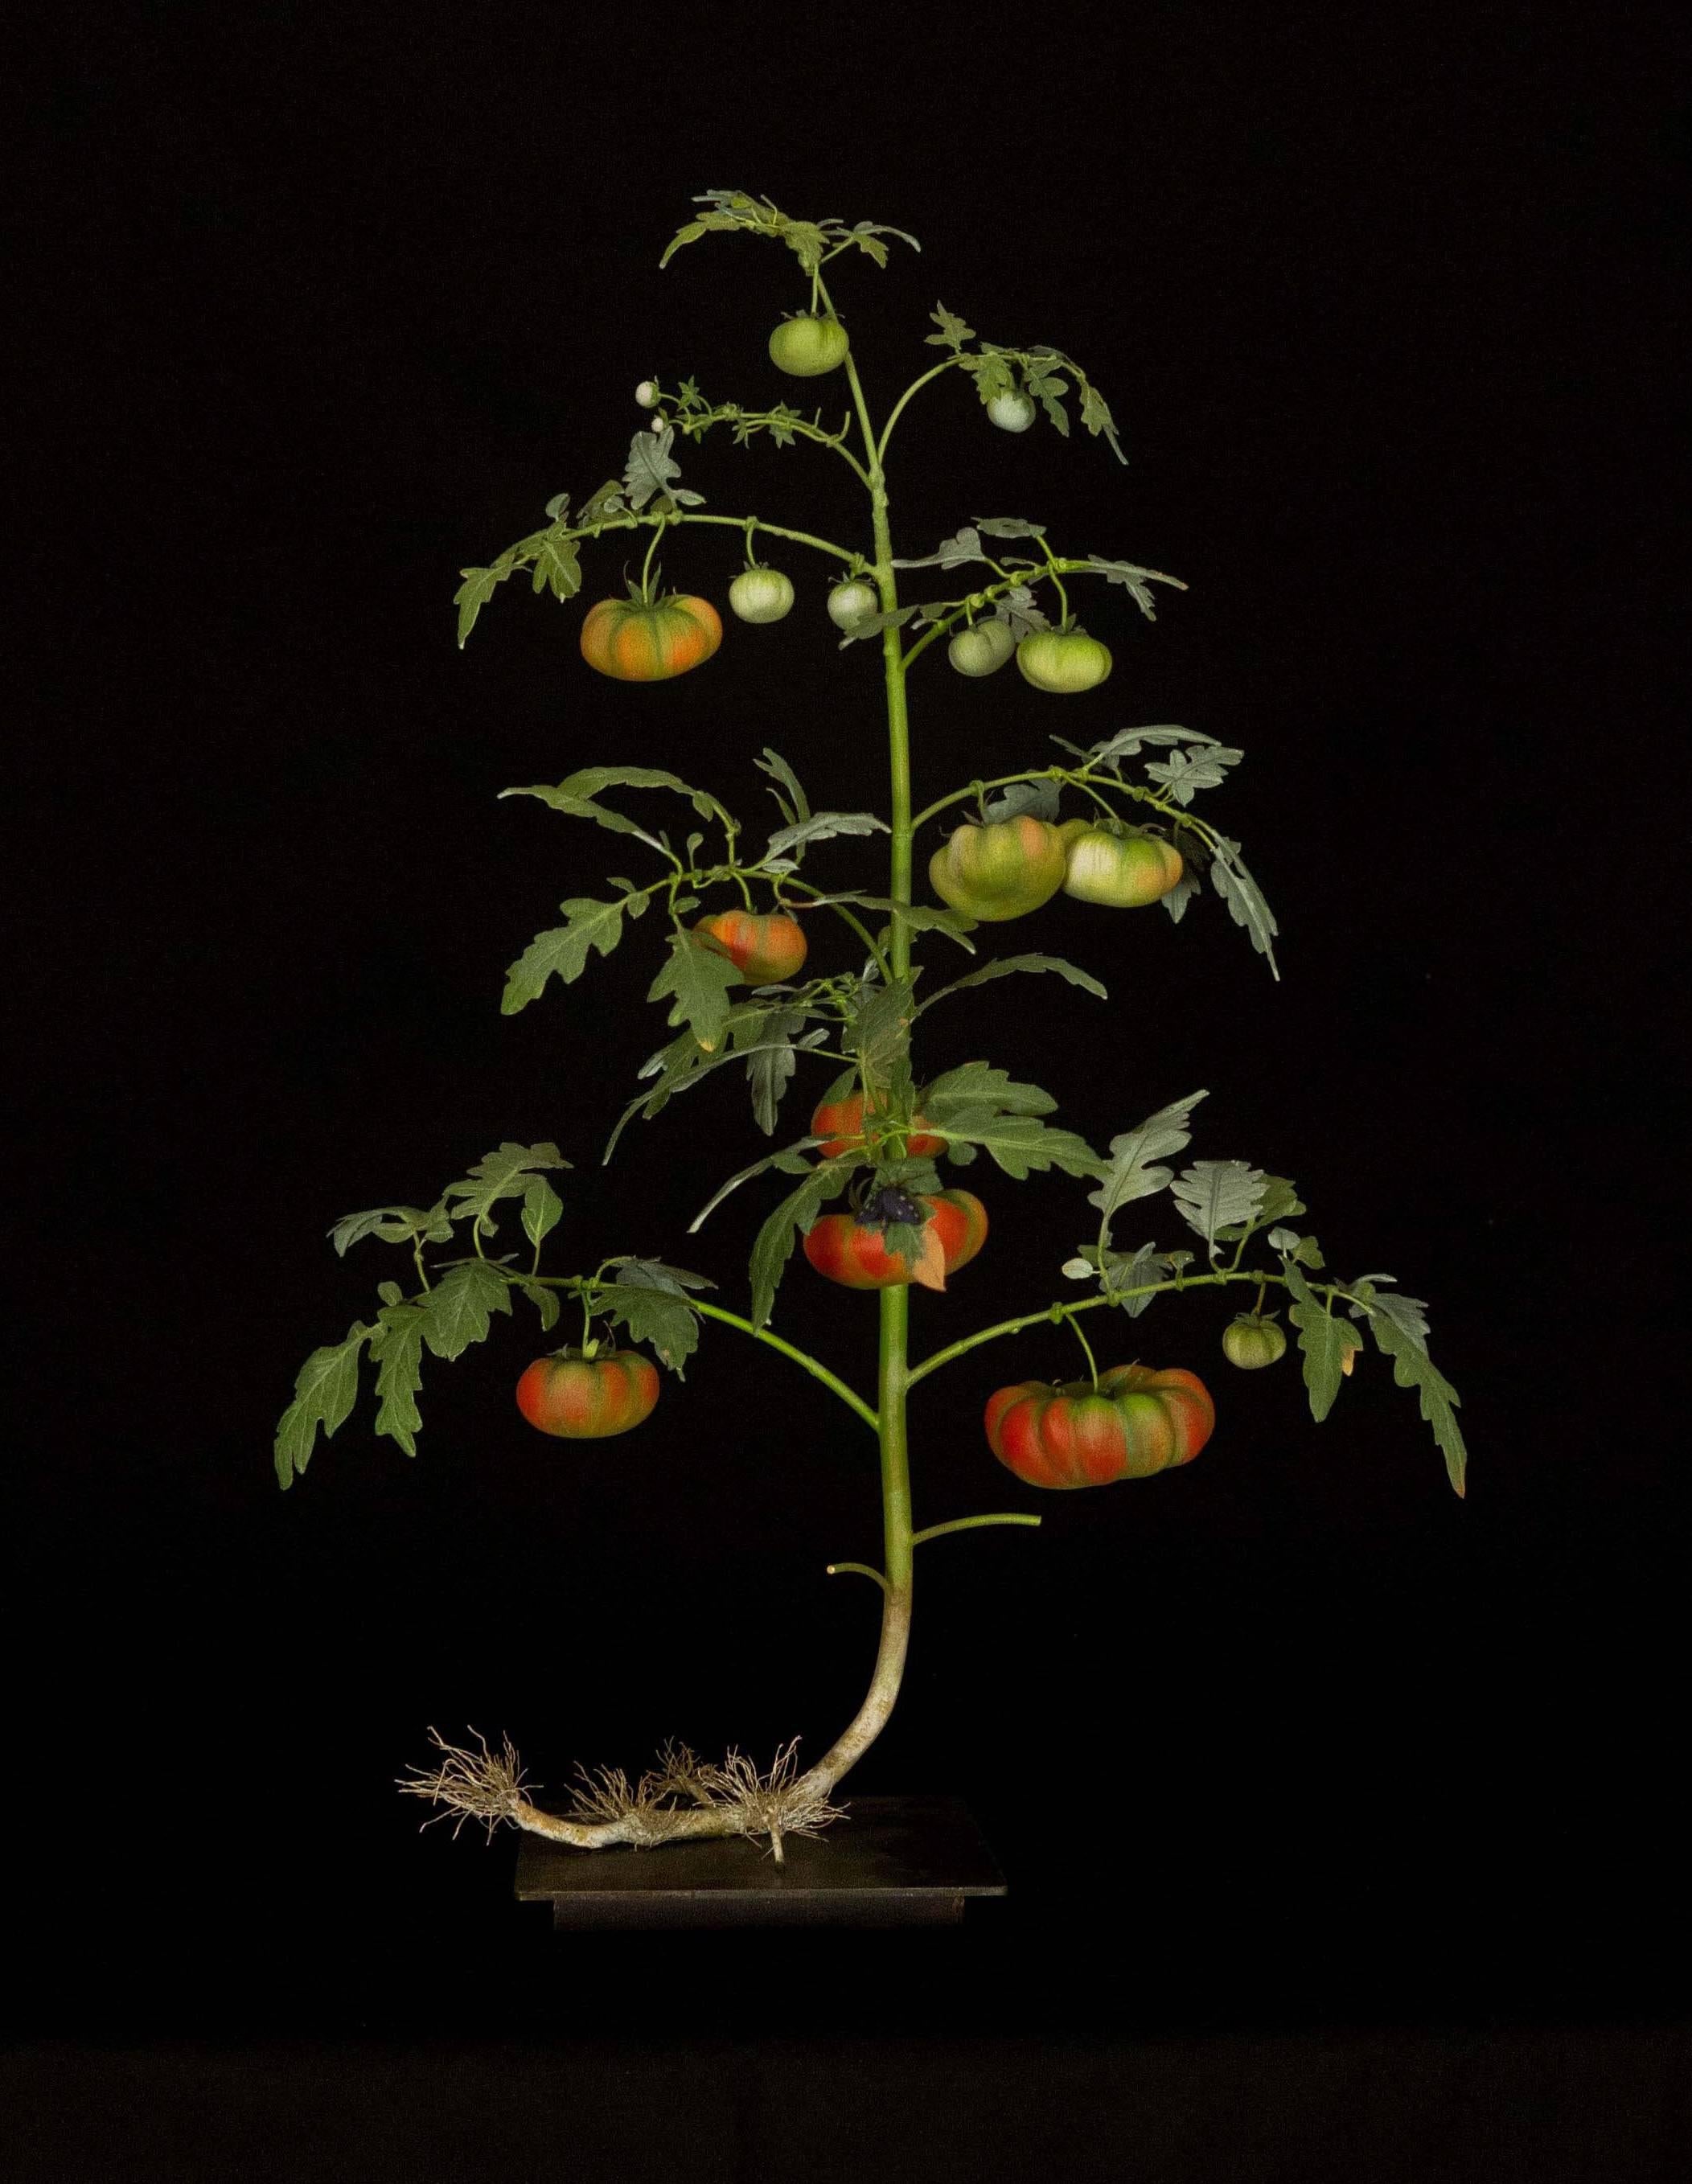 Tomato Plant with Syntomide - Sculpture by Carmen Almon